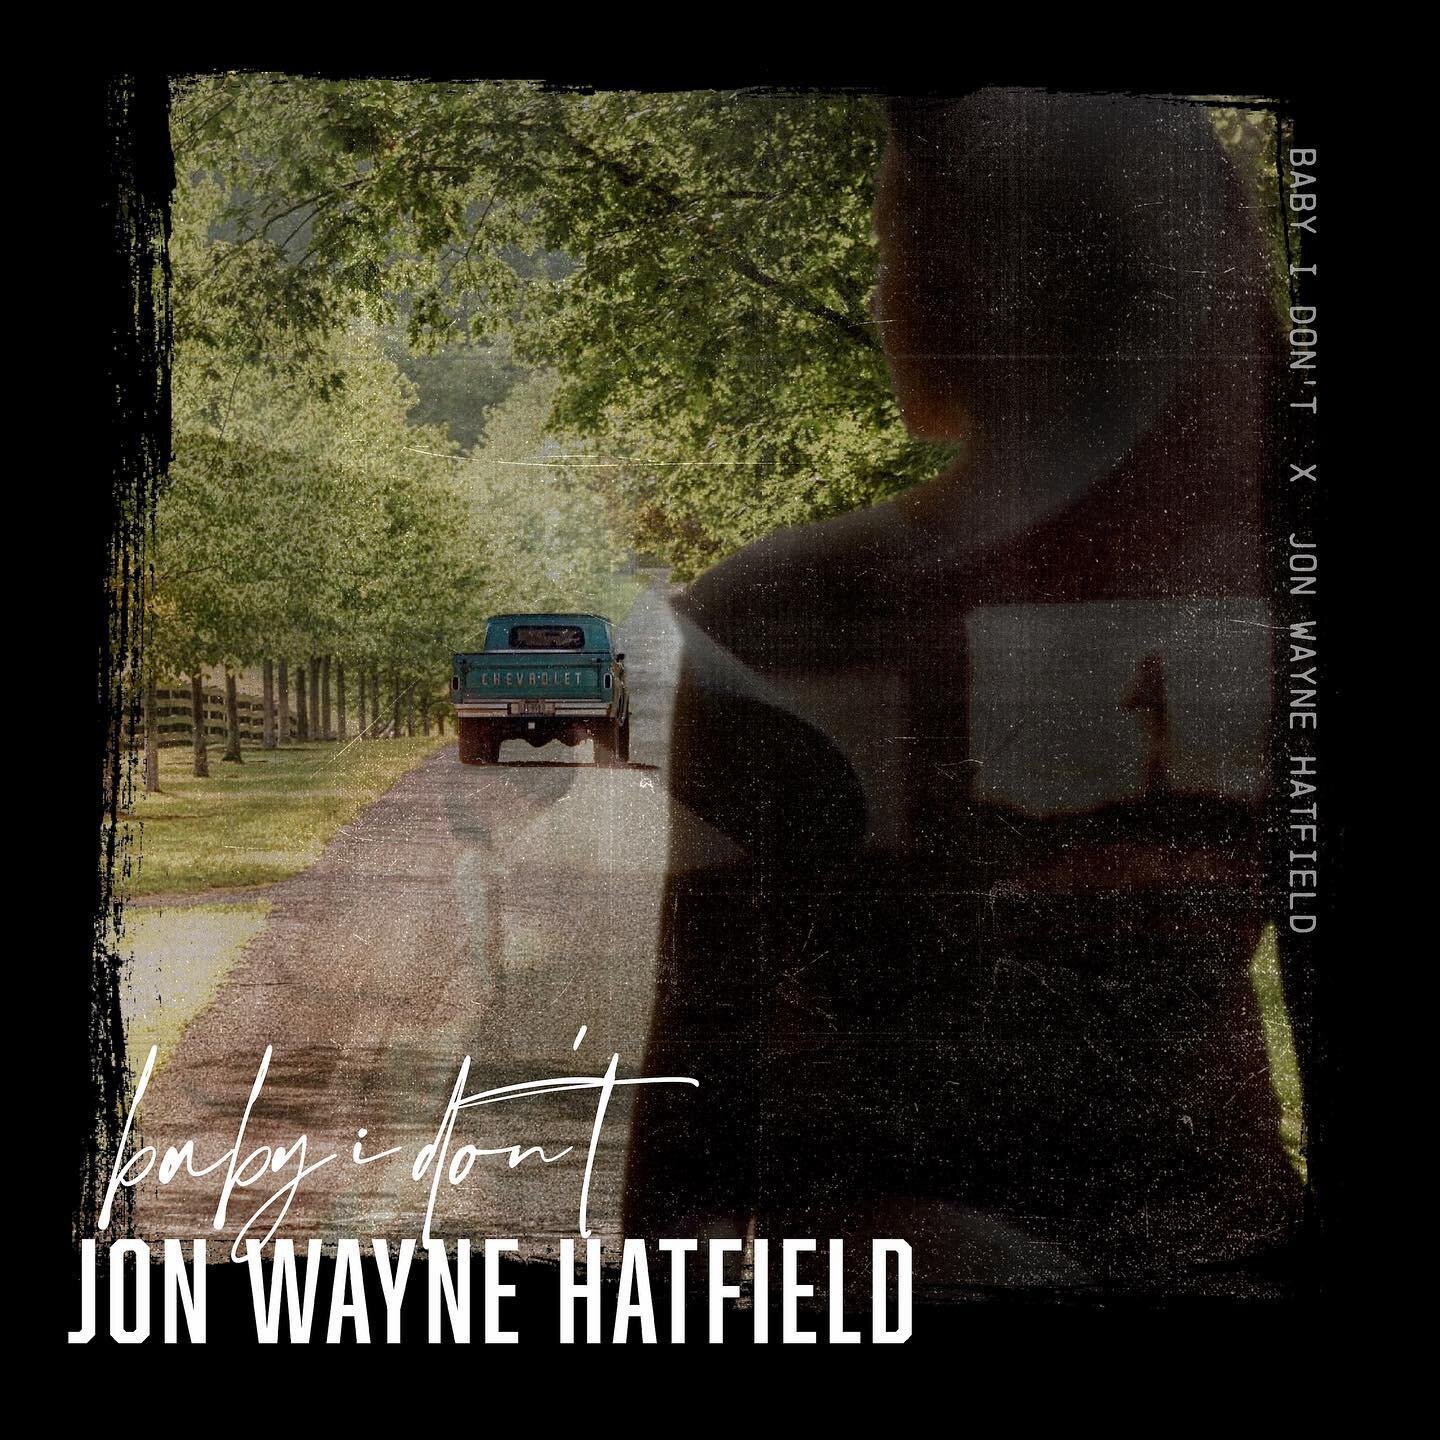 Be sure to check out &ldquo;Baby I Don&rsquo;t&rdquo; by @jonwaynehatfield OUT NOW🎧